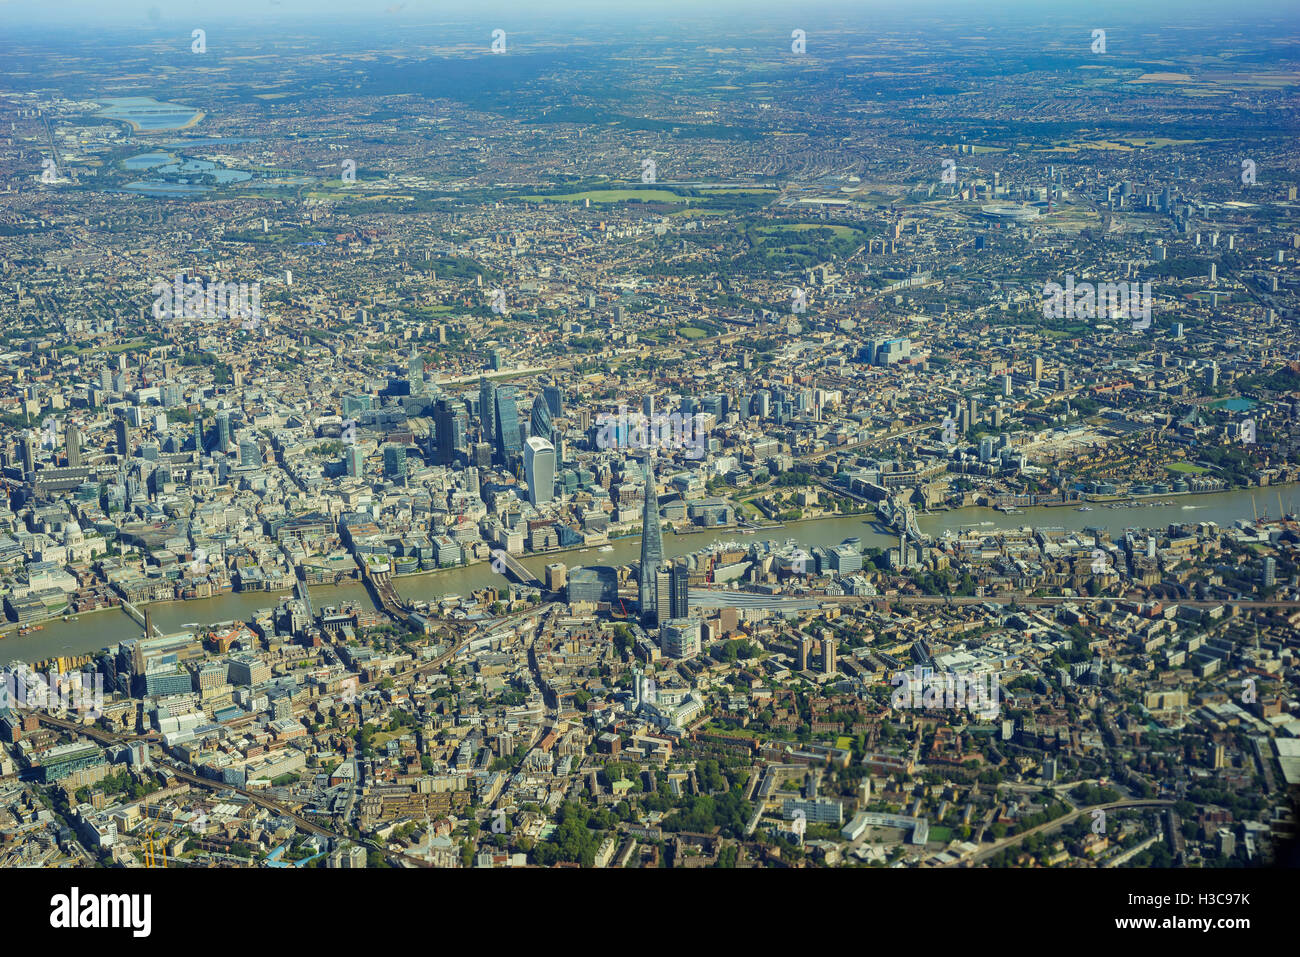 Aerial view of Clerkenwell, Farringdon, Barbican, Whitechapel, Wapping, Southwark of London, United Kingdom Stock Photo